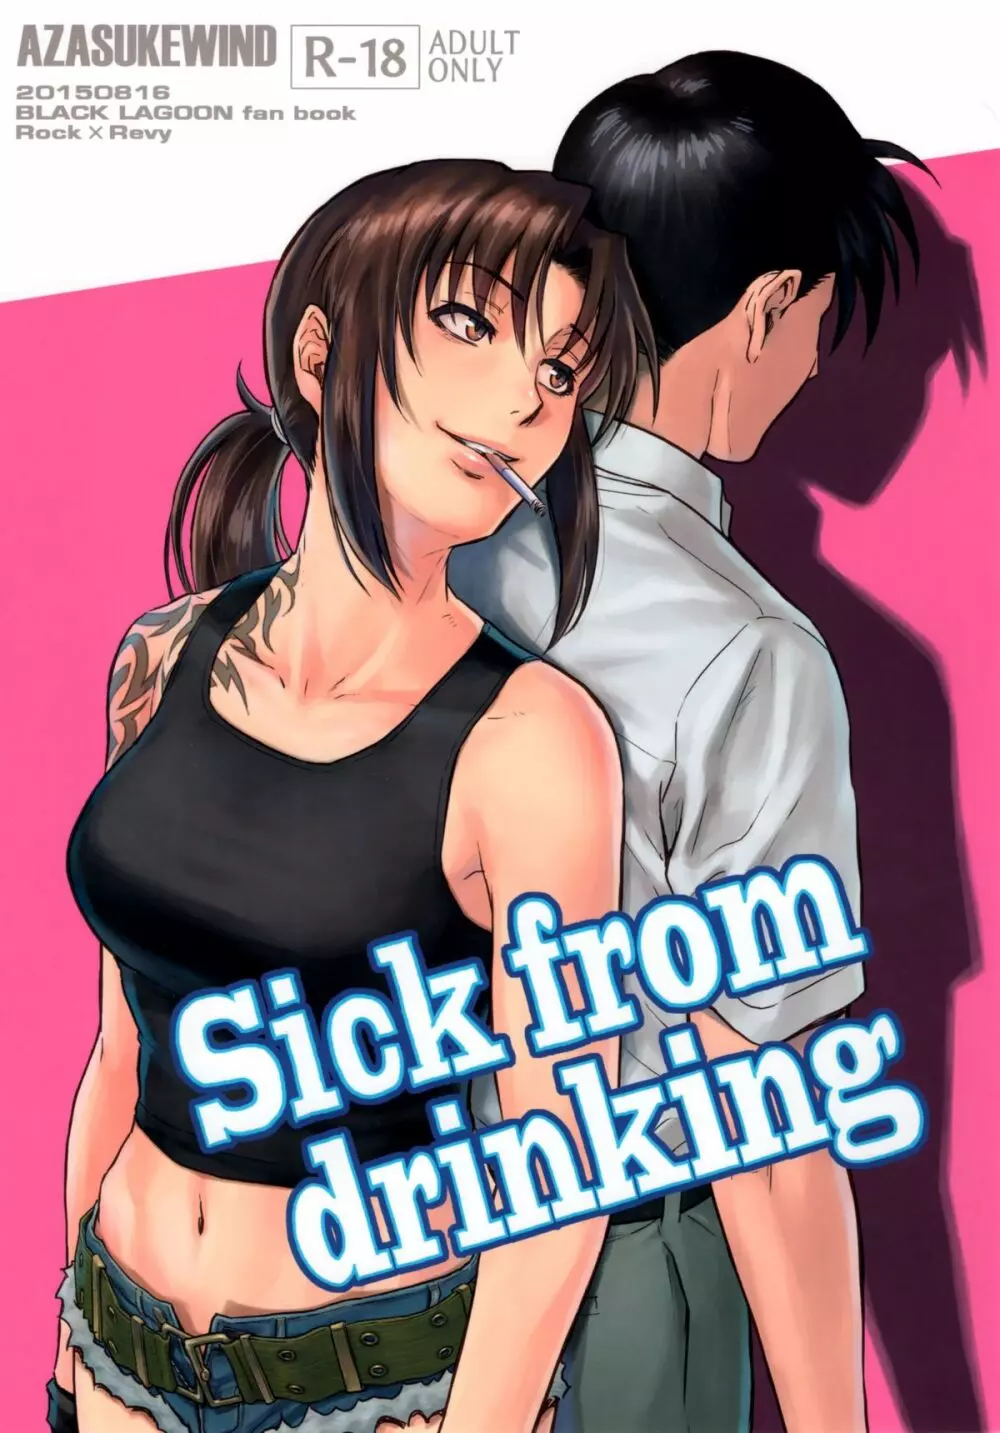 Sick from drinking - page1